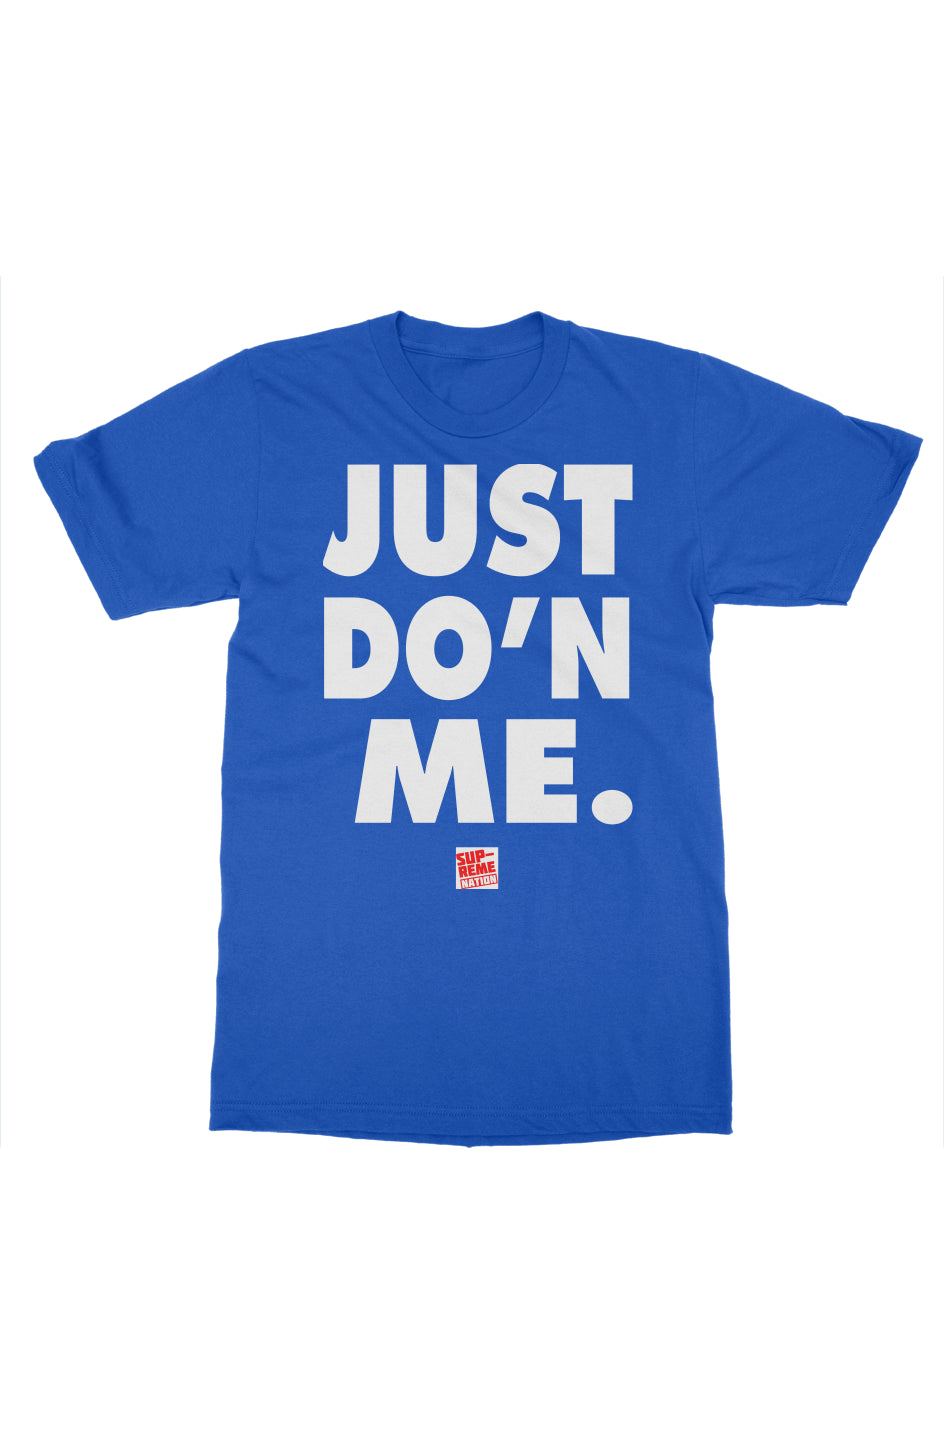 Just Do'n Me Short Sleeves by Supreme Nation